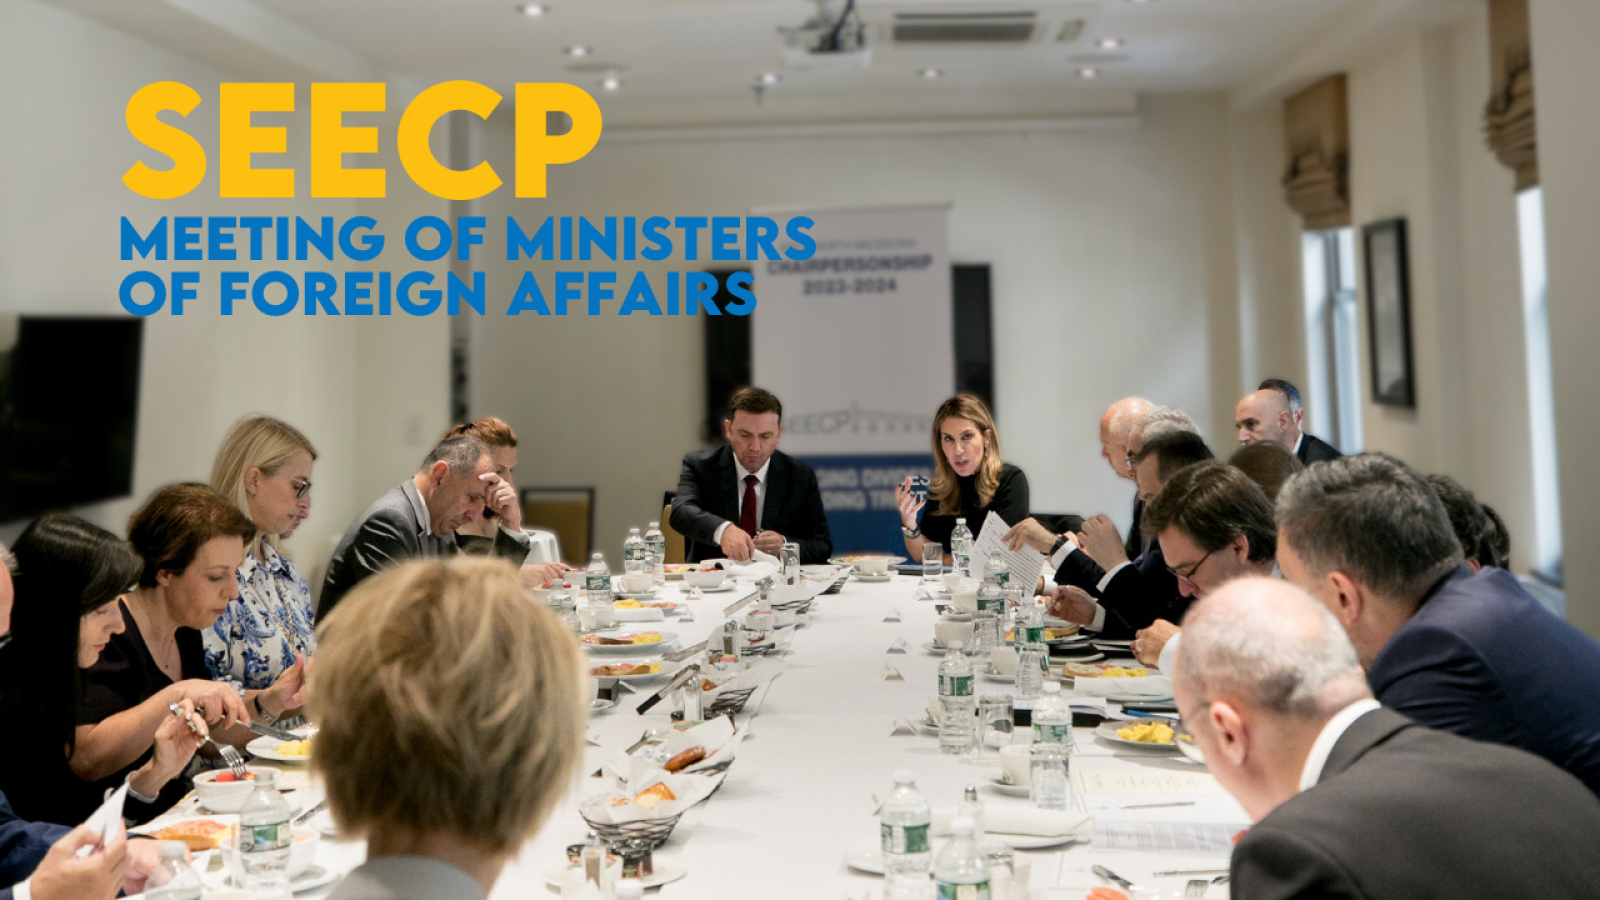 SEECP Ministers of foreign affairs meeting in #NewYork